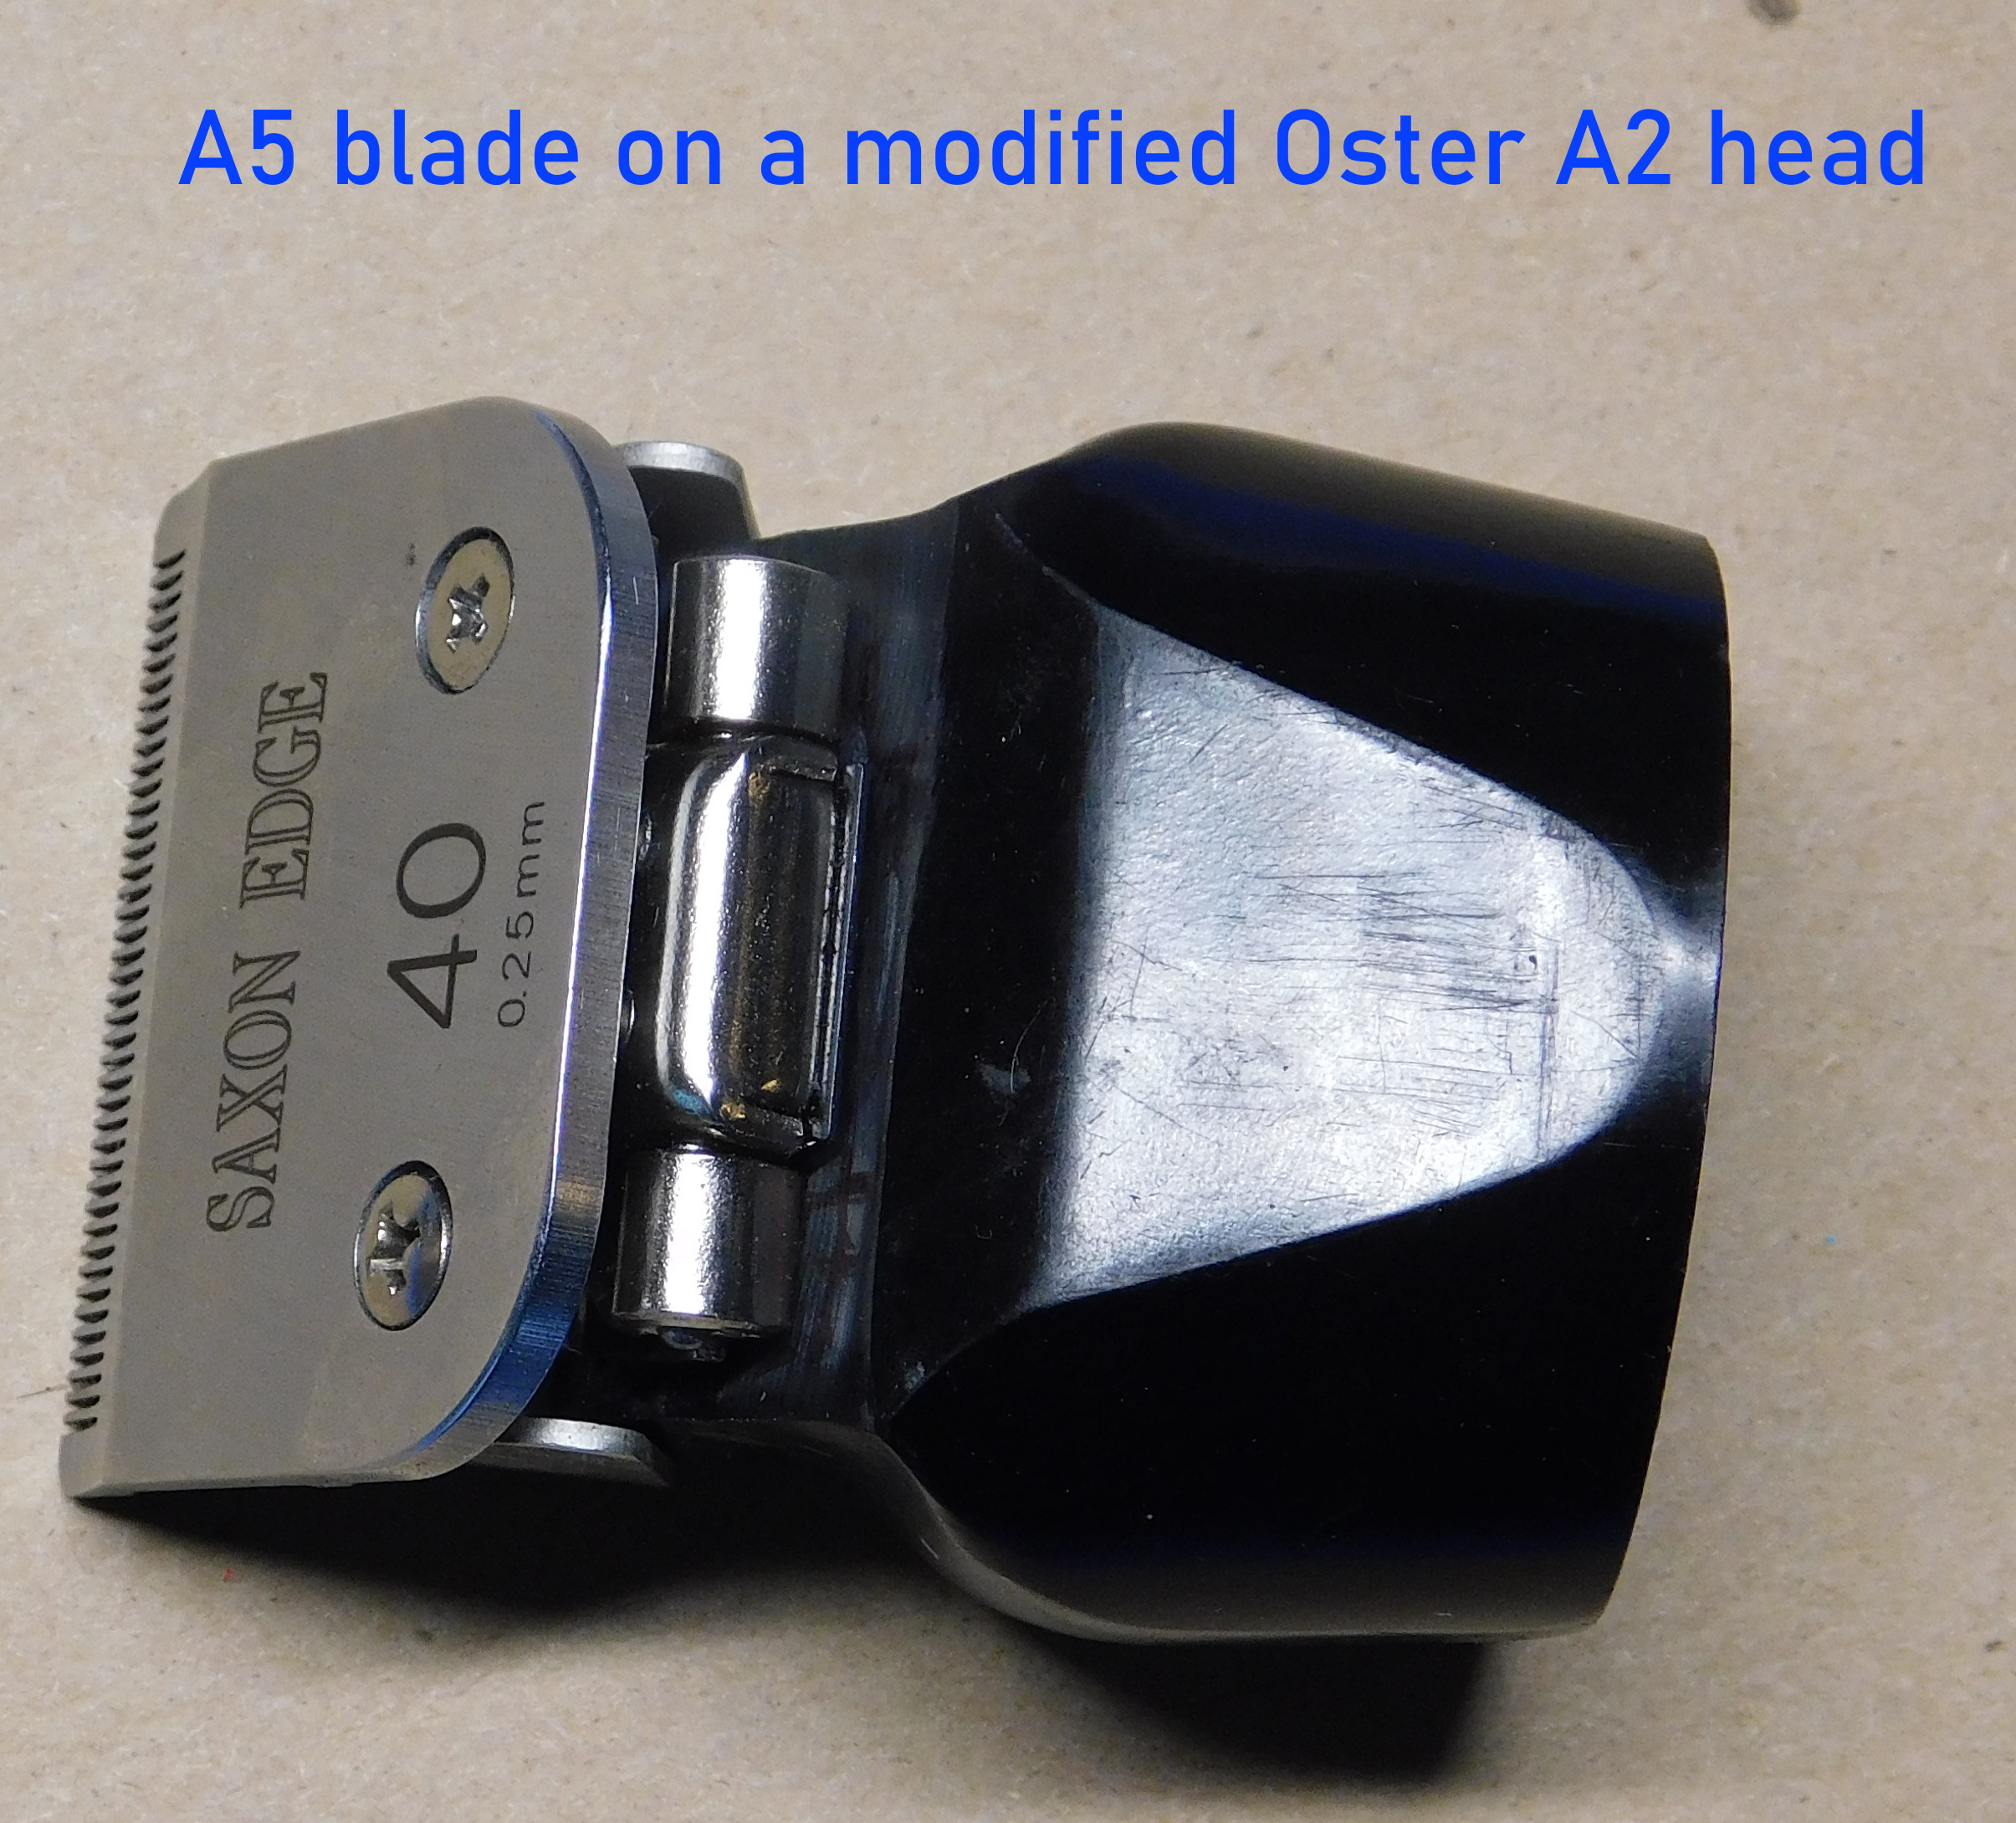 A2_to_A5_modification showing a A2 head with an A5 blade